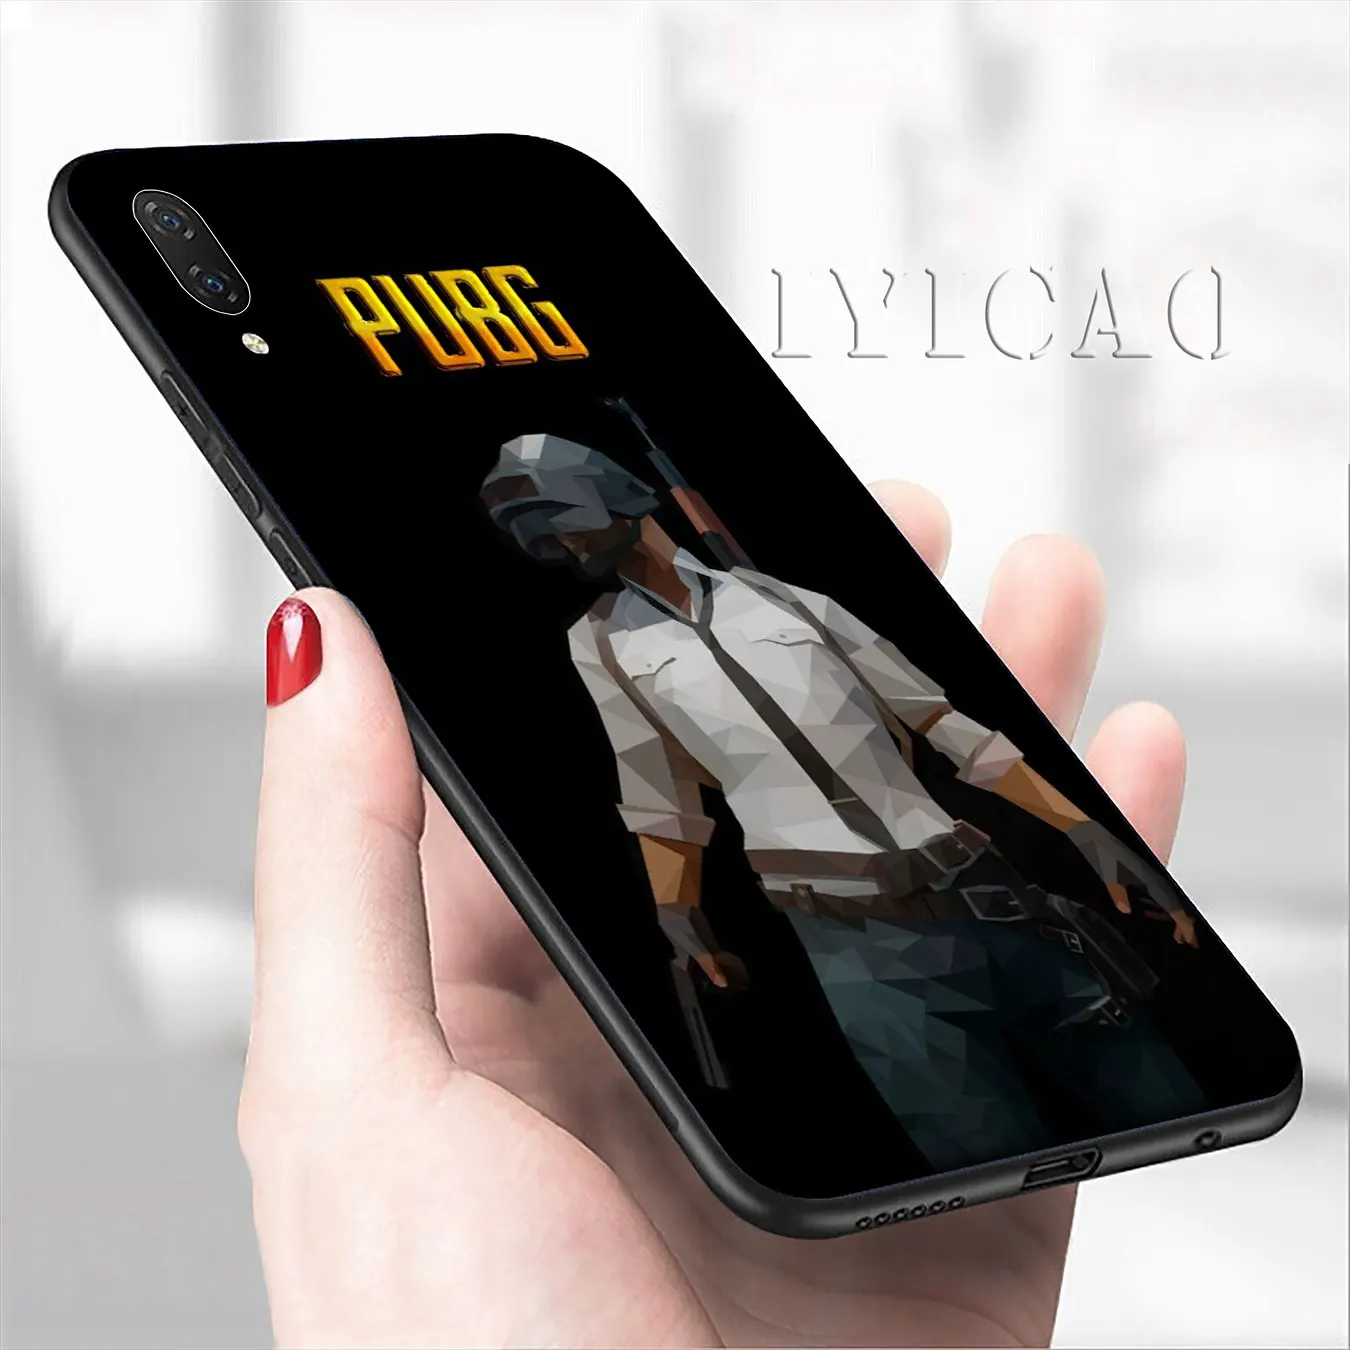 IYICAO PUBG 98K Game Art Soft Phone Case for Xiaomi Mi 10 9 9T A3 Pro CC9 CC9E 8 SE A2 Lite A1 6 pocophone f1 Mi9 |